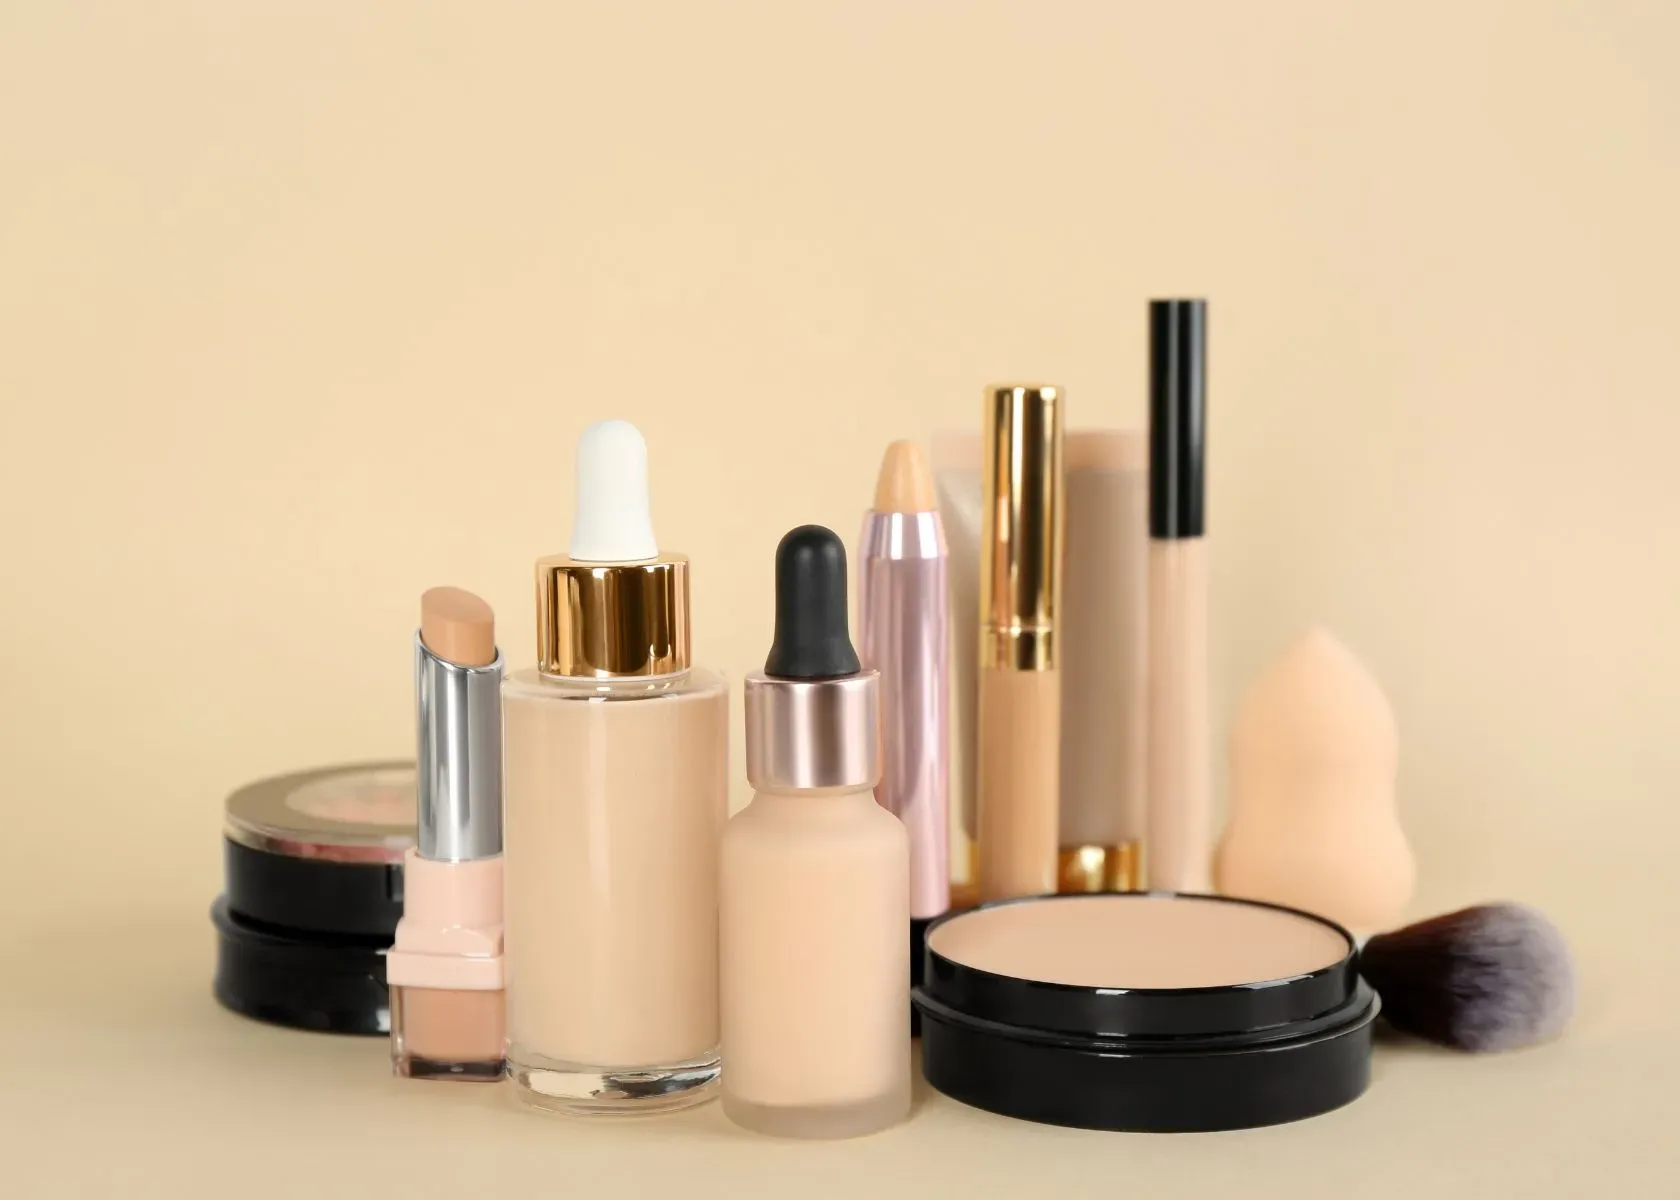 Factors to Consider When Choosing a Water-Based Foundation for Combination Skin